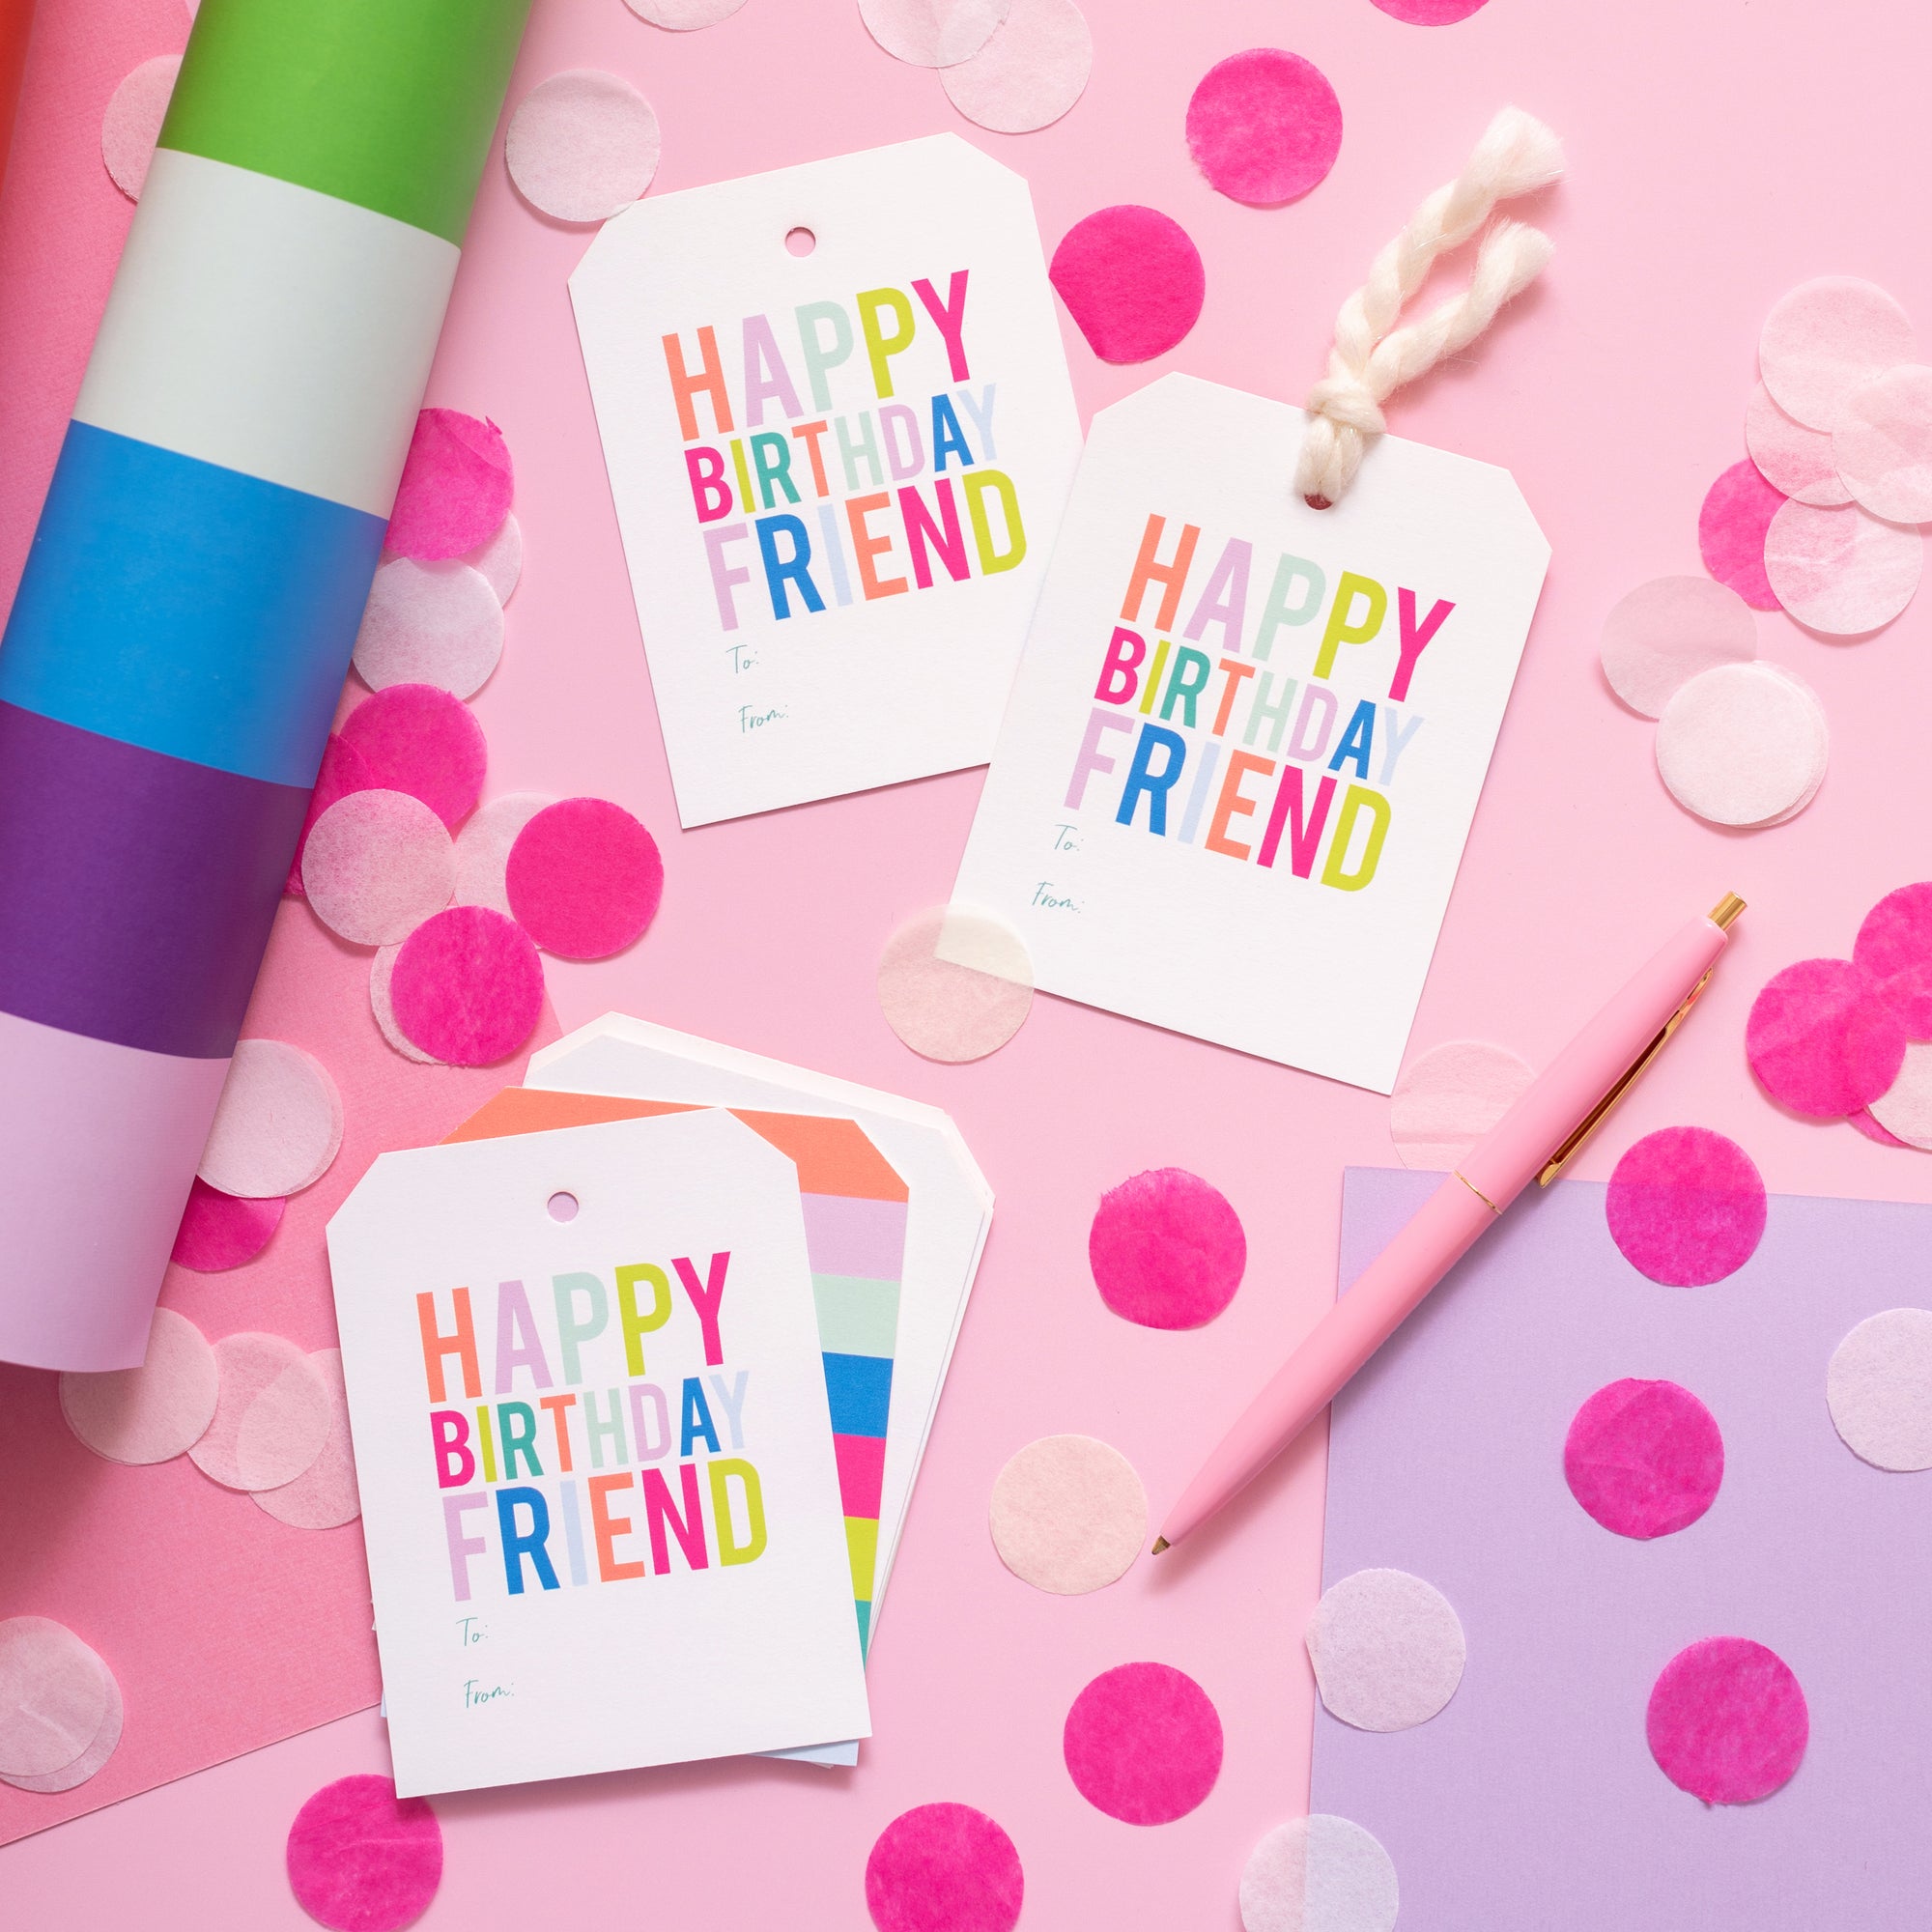 Happy Birthday Friend To From Gift Tags - Joy Creative Shop